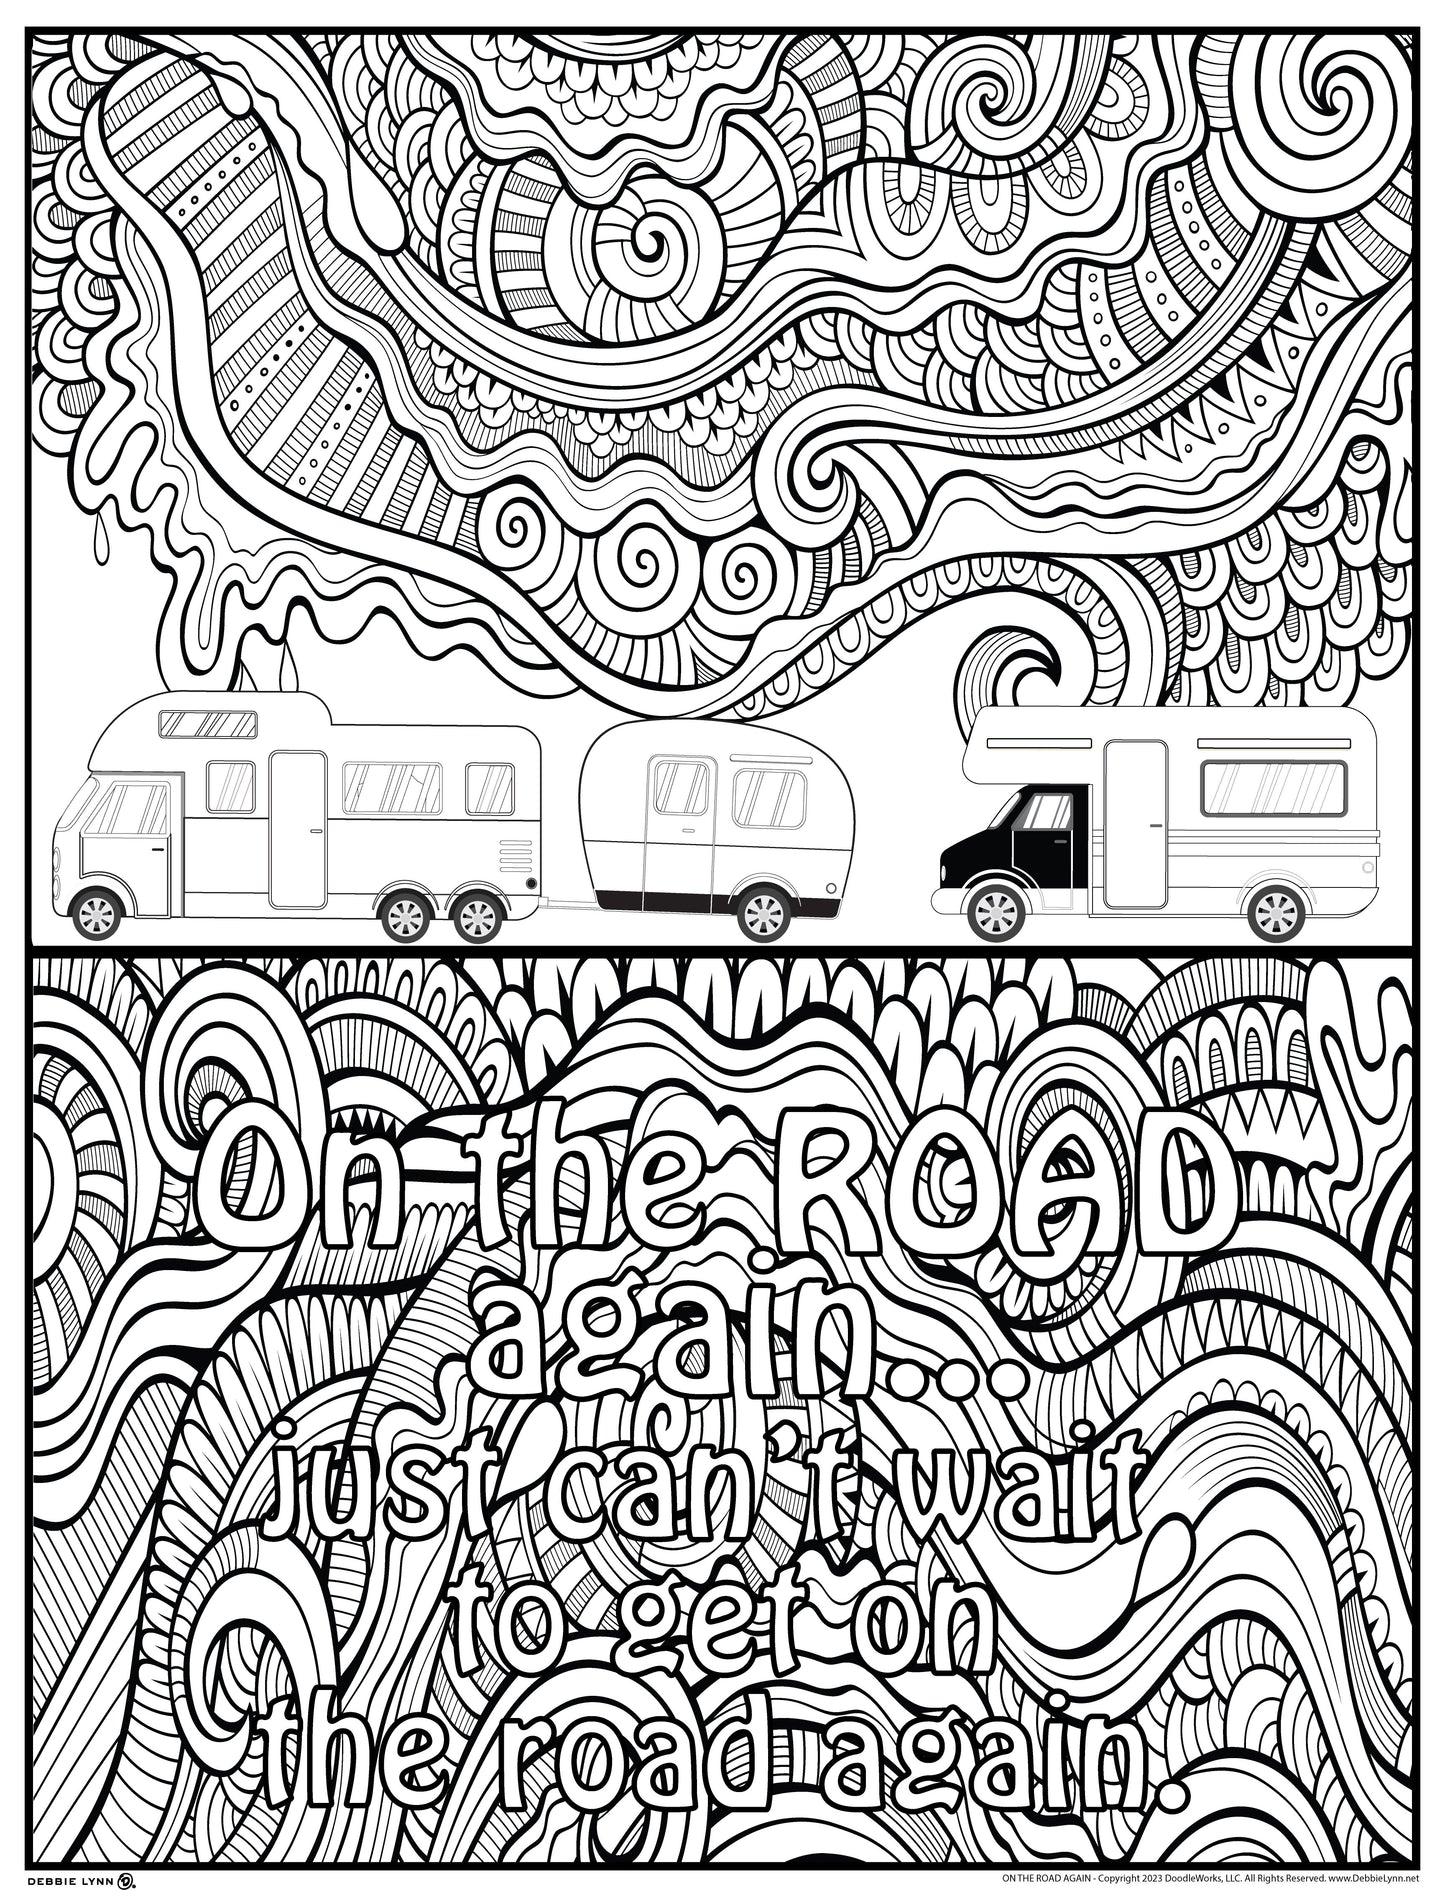 On The Road Again Personalized Giant Coloring Poster 46"x60"